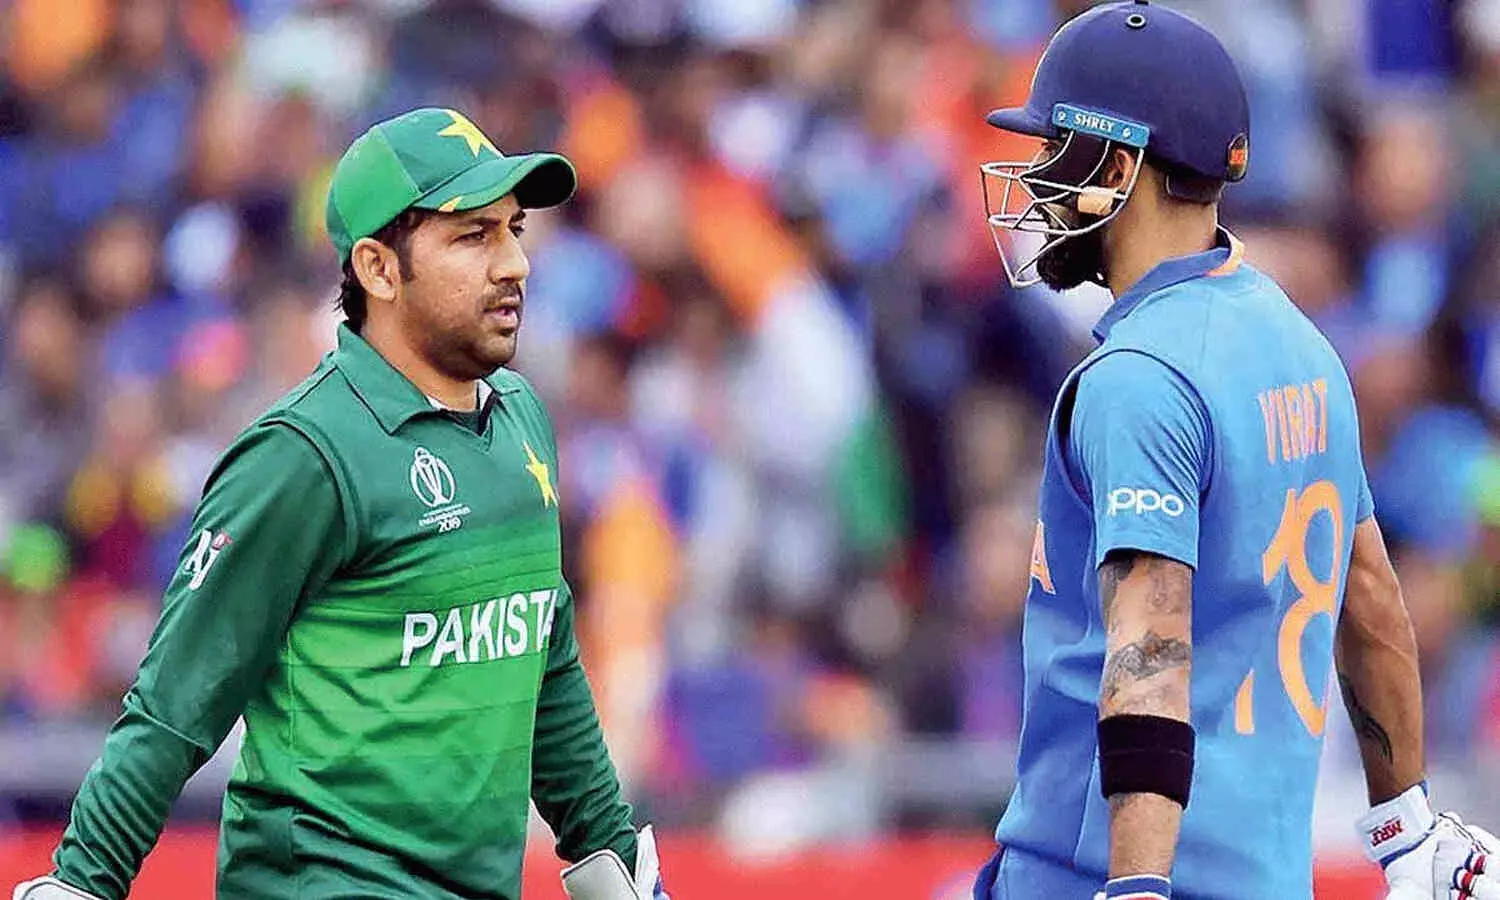 India vs Pakistan T20 World Cup 2021: Heres what past record says